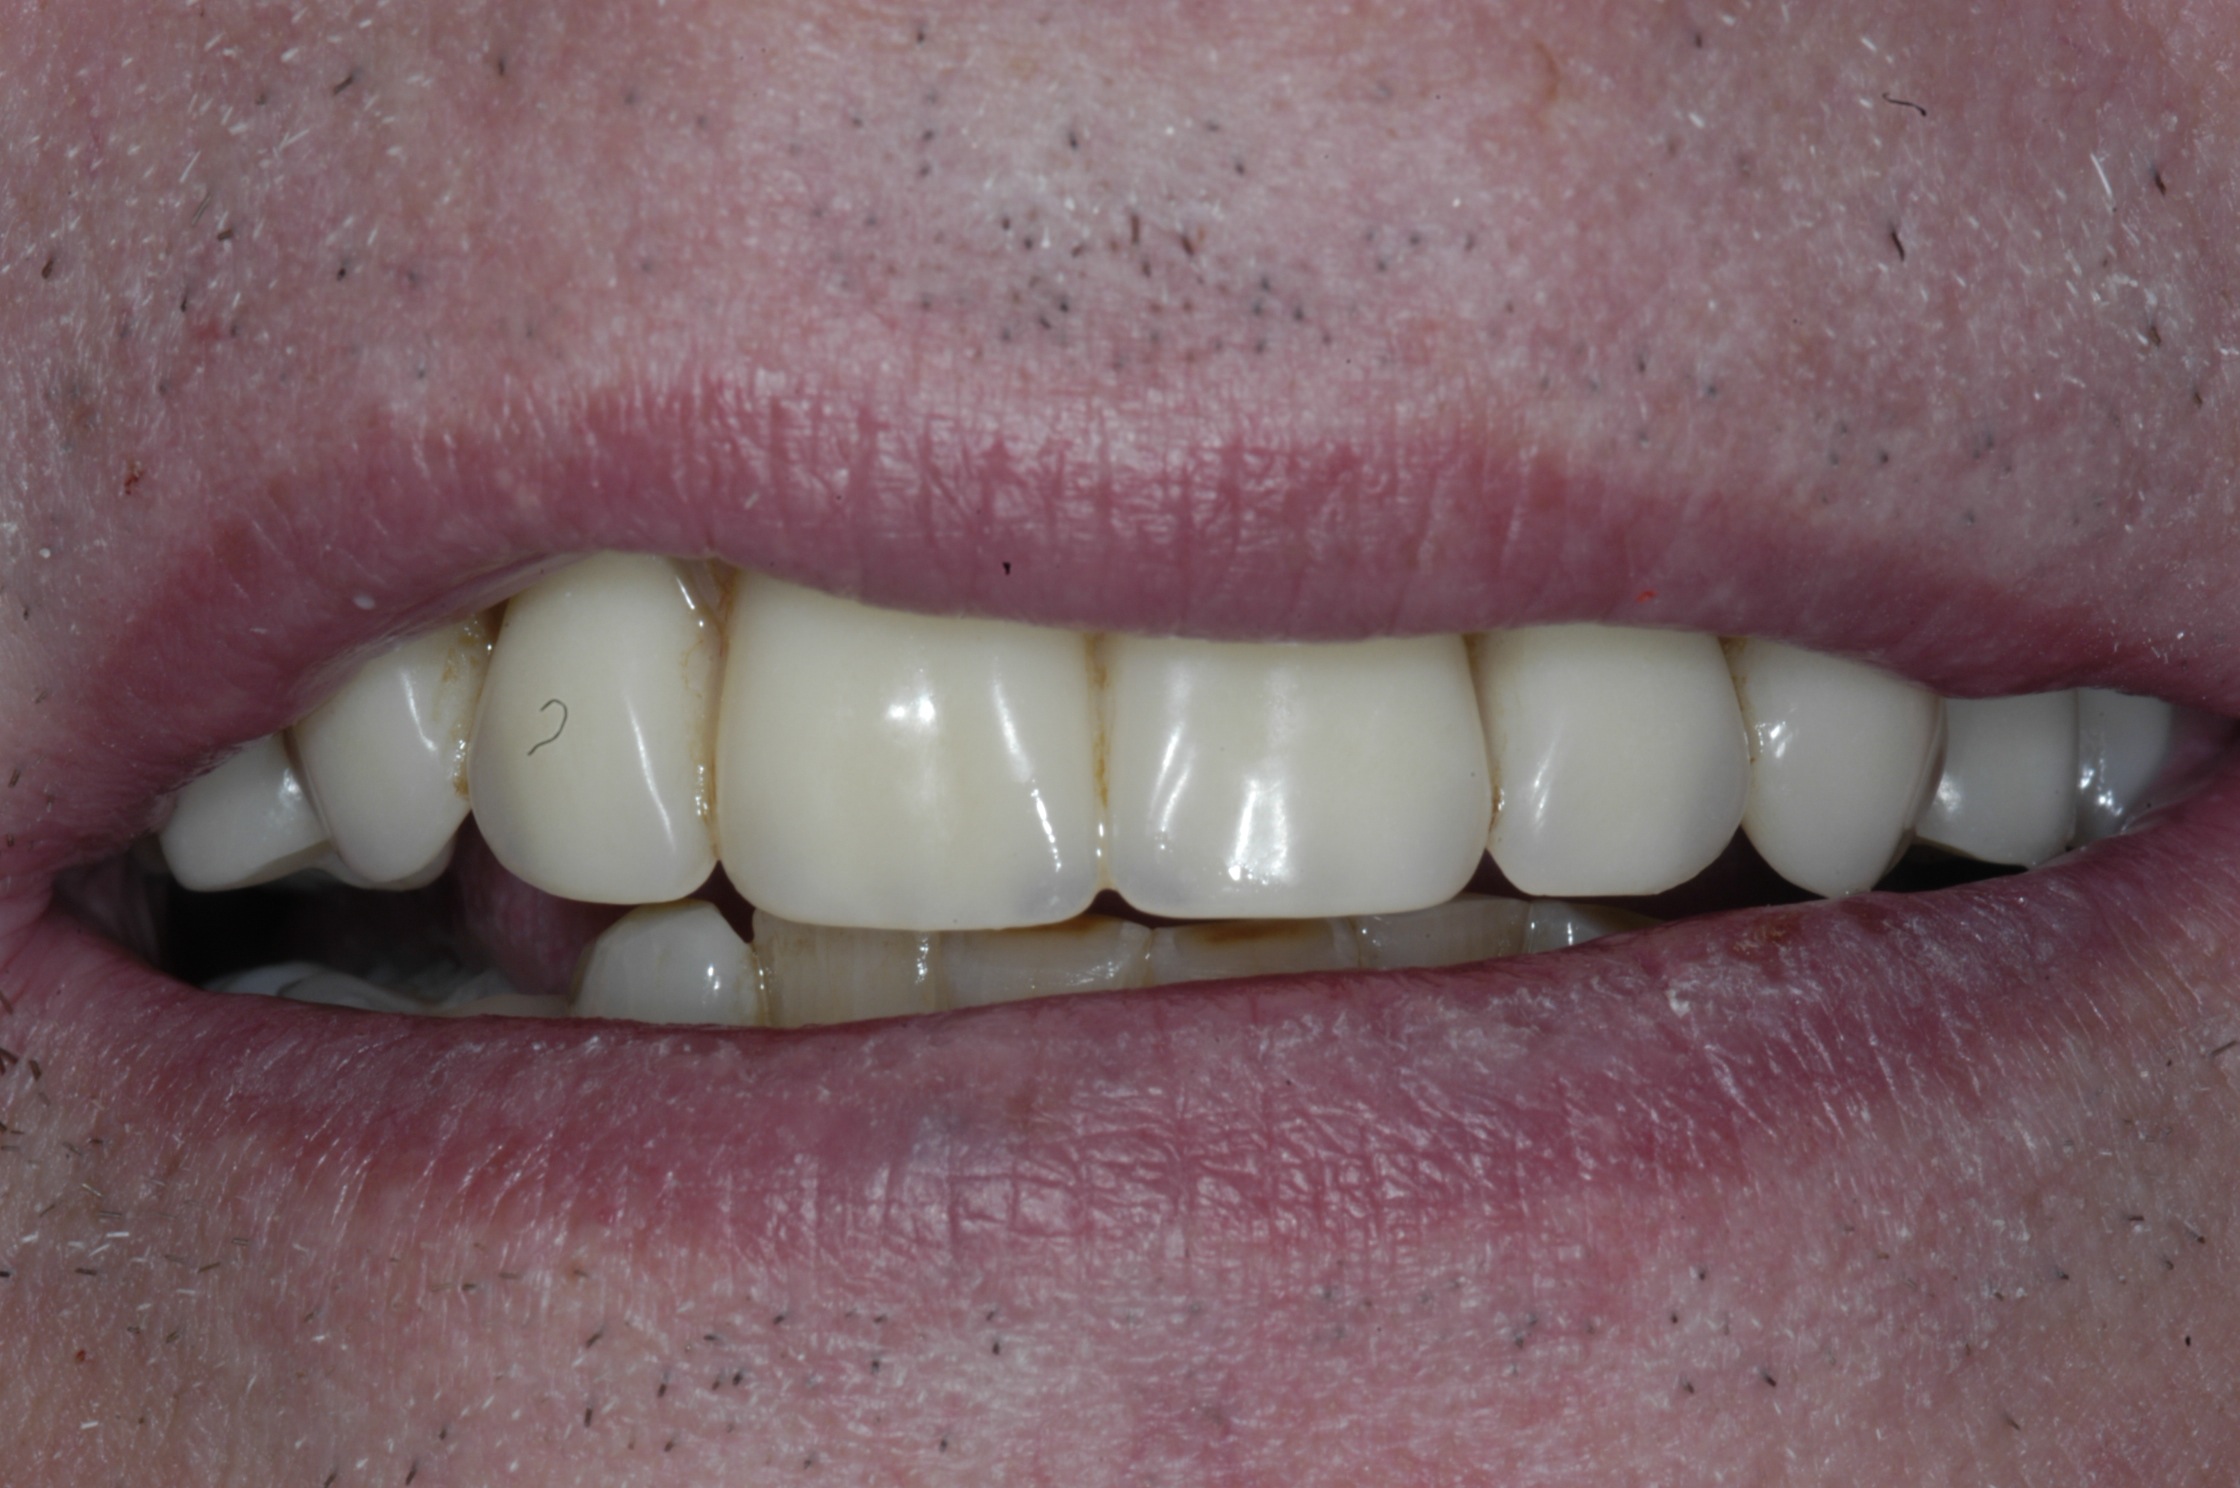 Natural smile and great denture stability